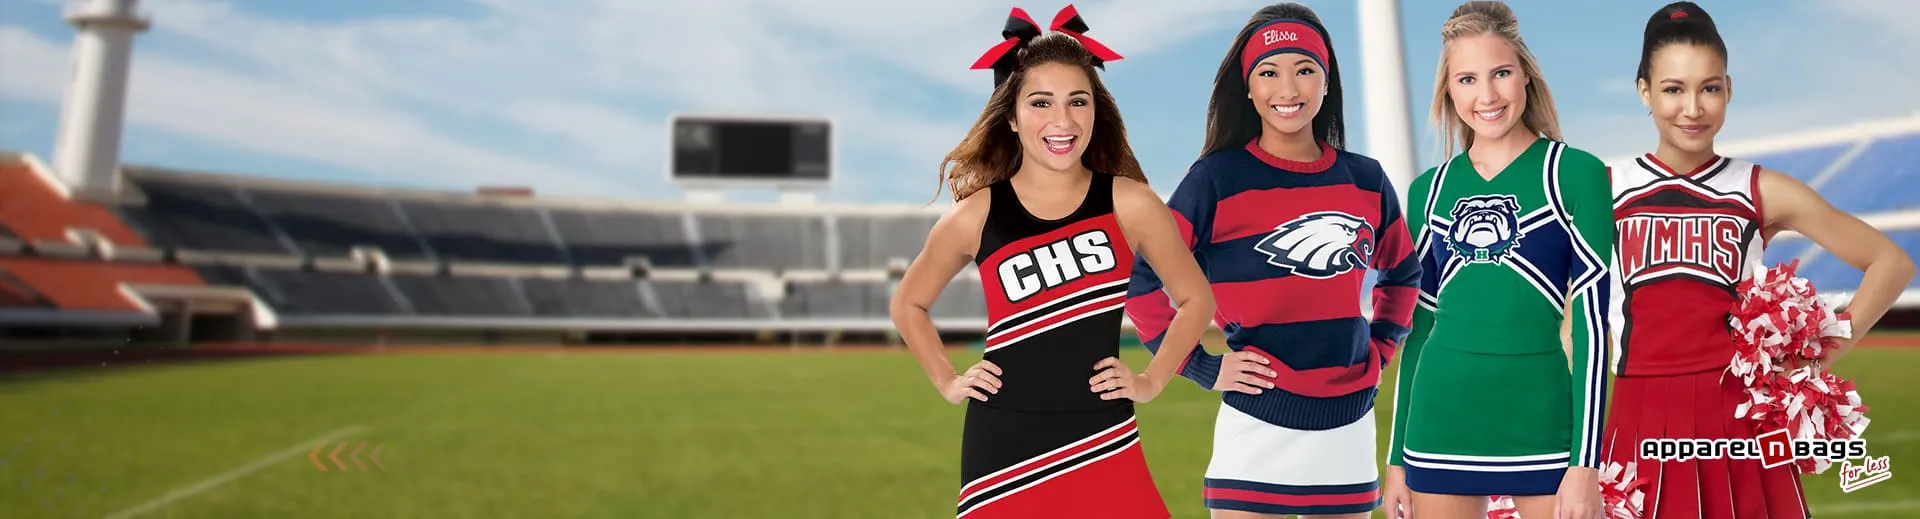 Shop Custom Cheerleading Outfits & Dance Uniforms in Mississauga -  ApparelnBags